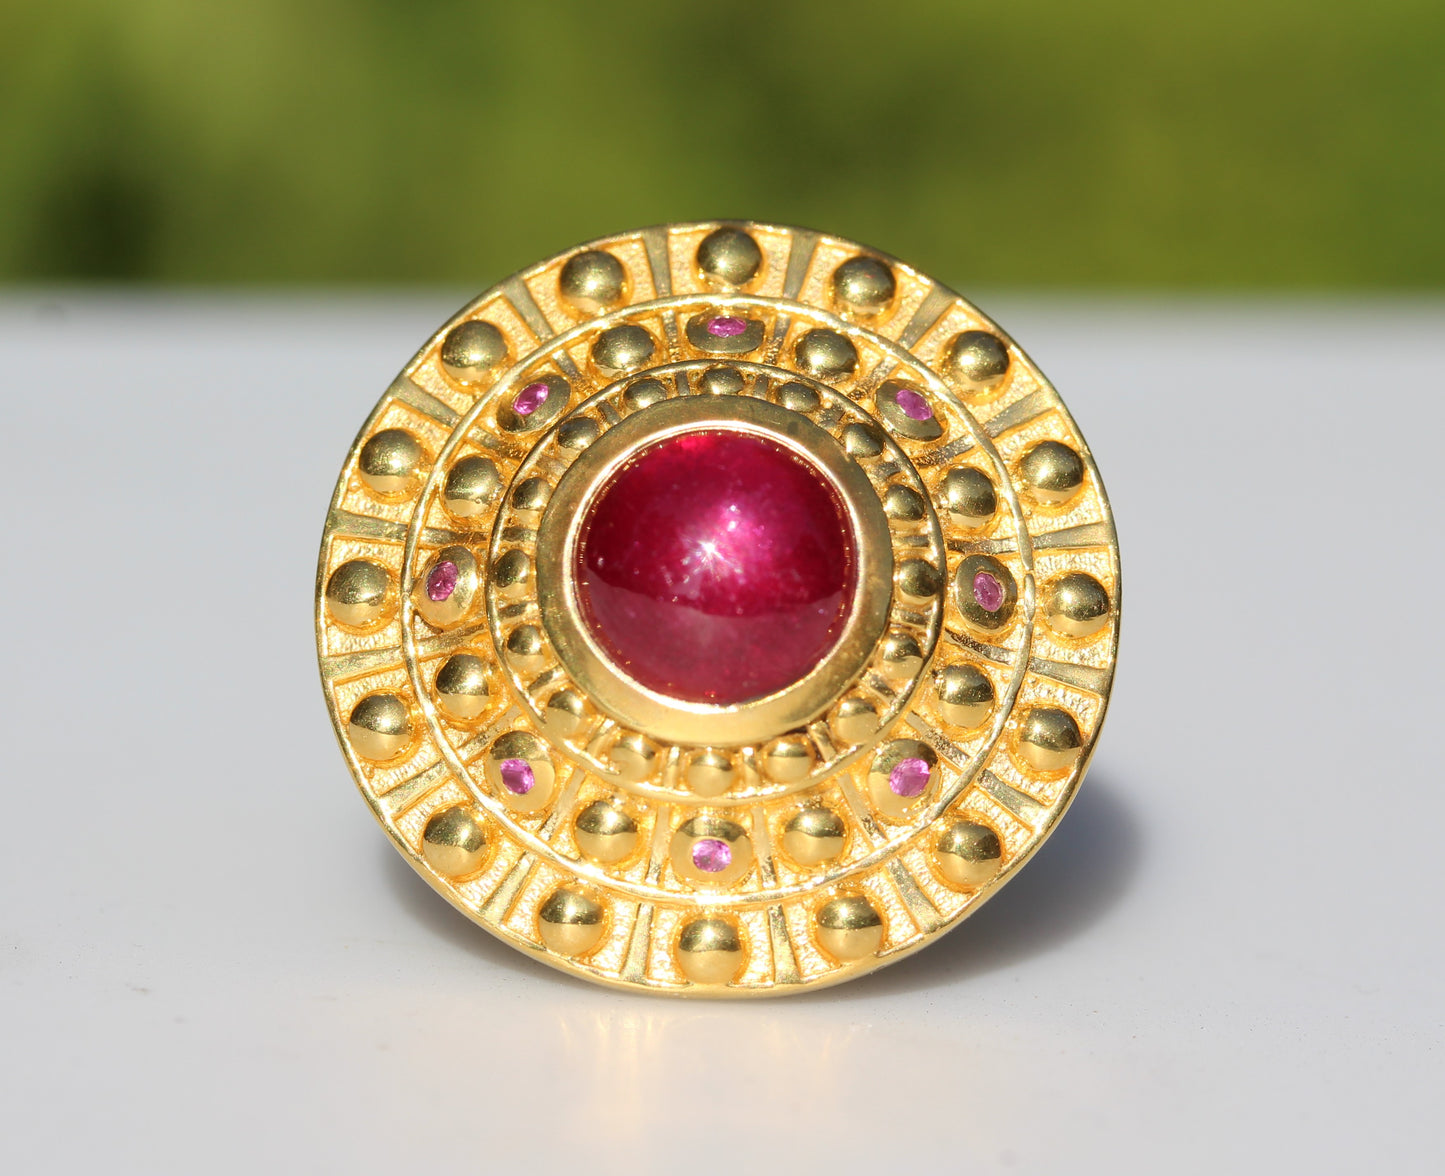 Red Ruby Ring - 24k Gold Plated - Adjustable Size  - #264